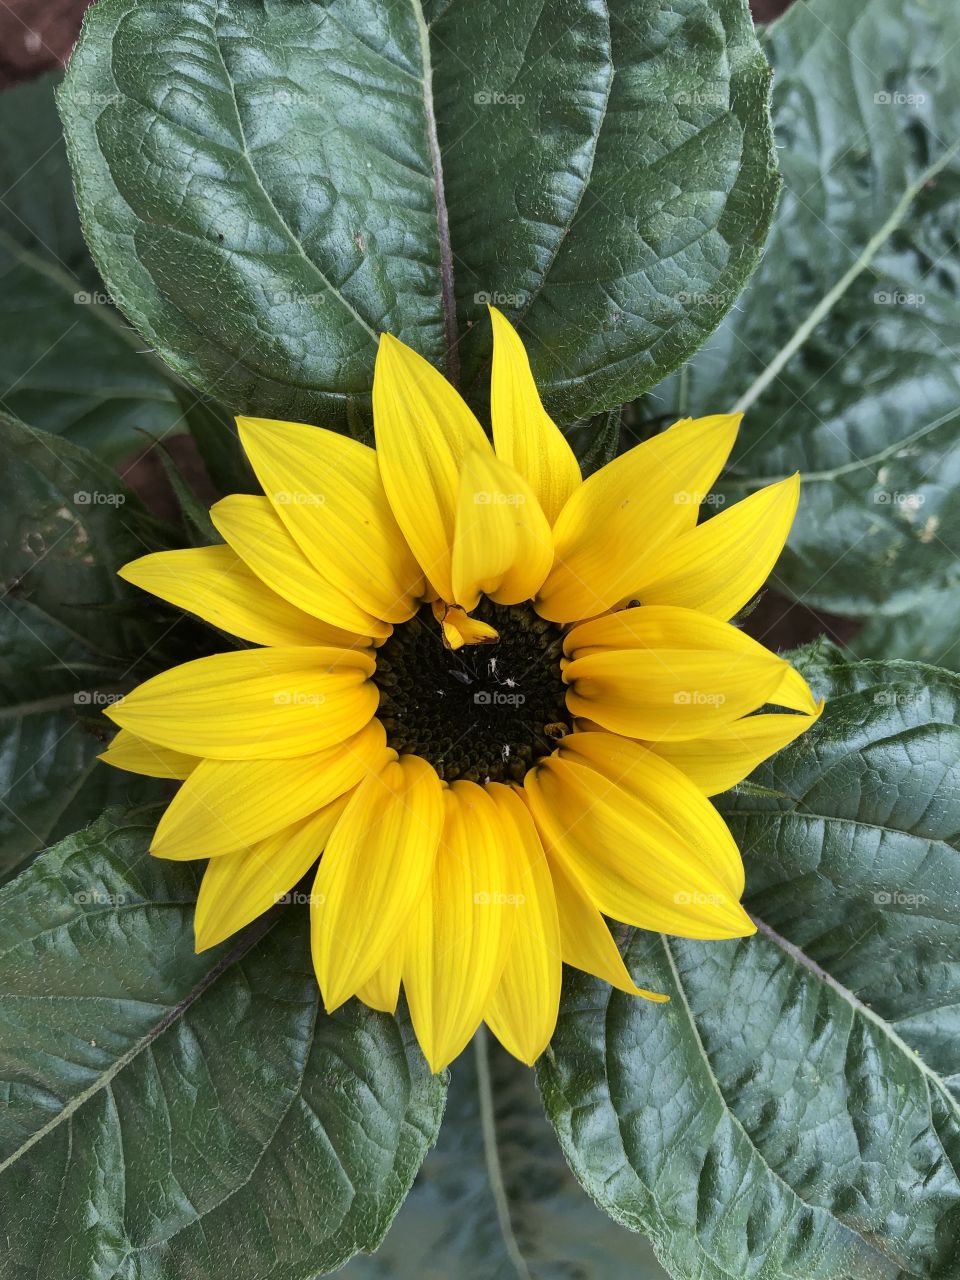 We welcomed a new addition to our garden today, a very very lovely “sunflower.”